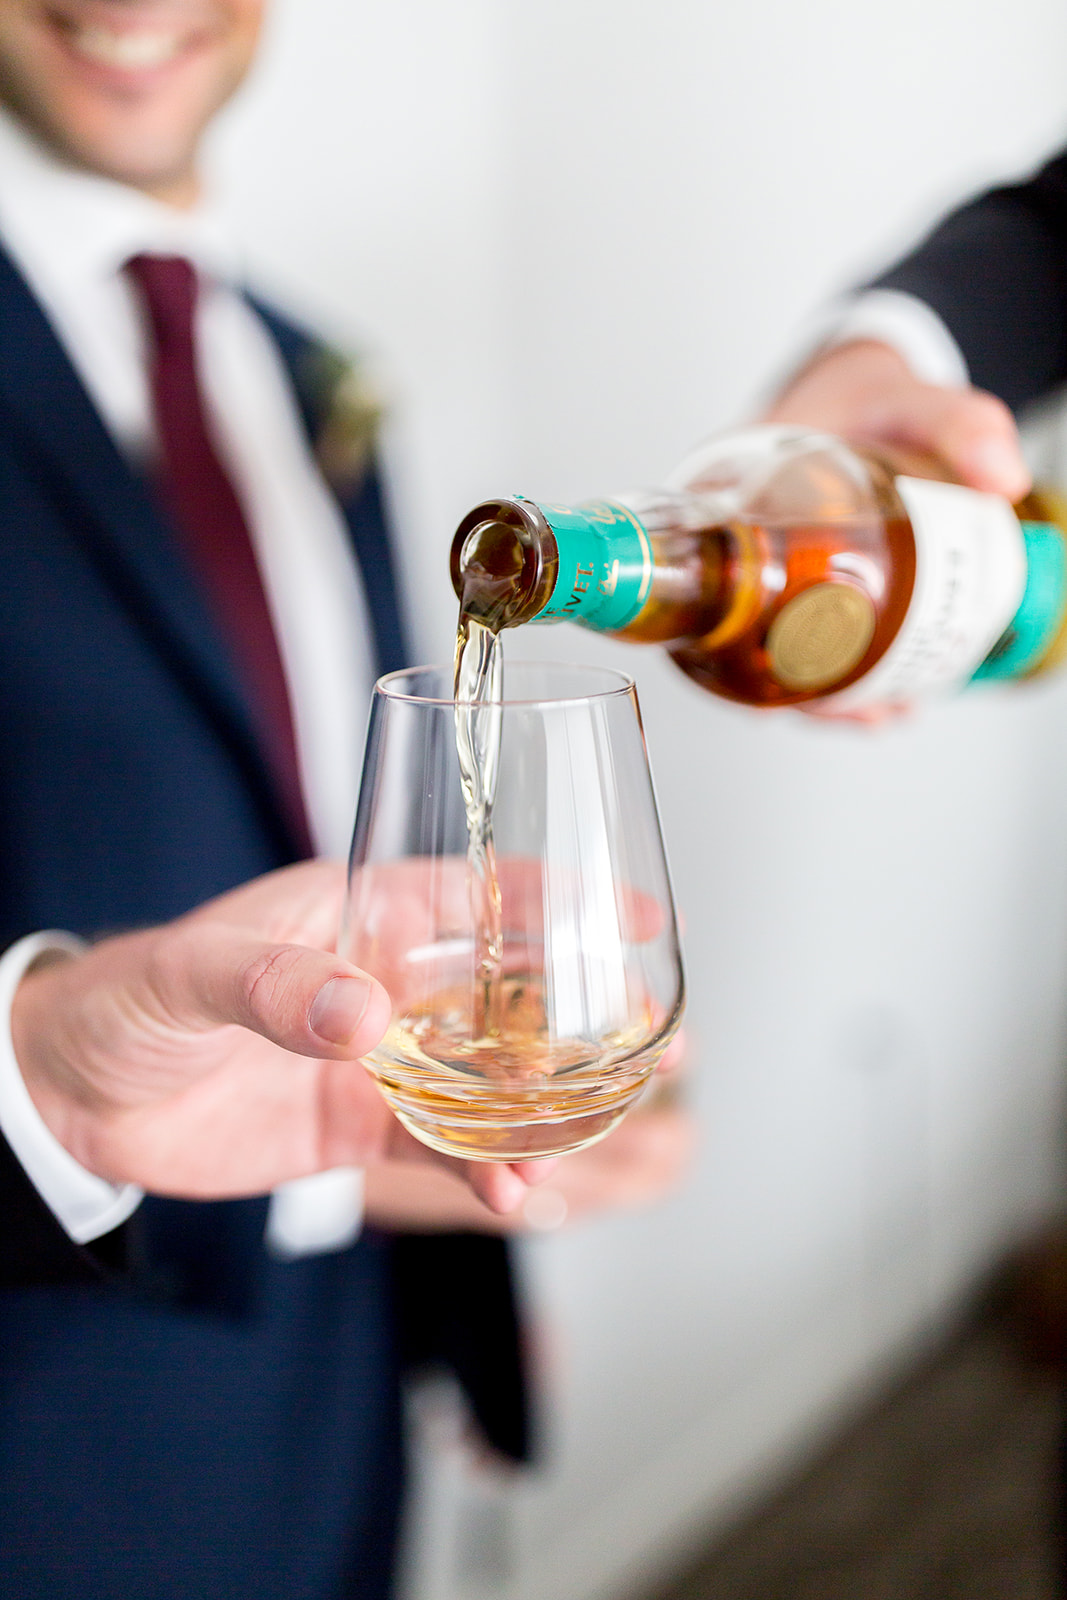 Detail shot of The Glenlivet Single Malt Scotch Whiskey being poured into a glass held by a groomsman